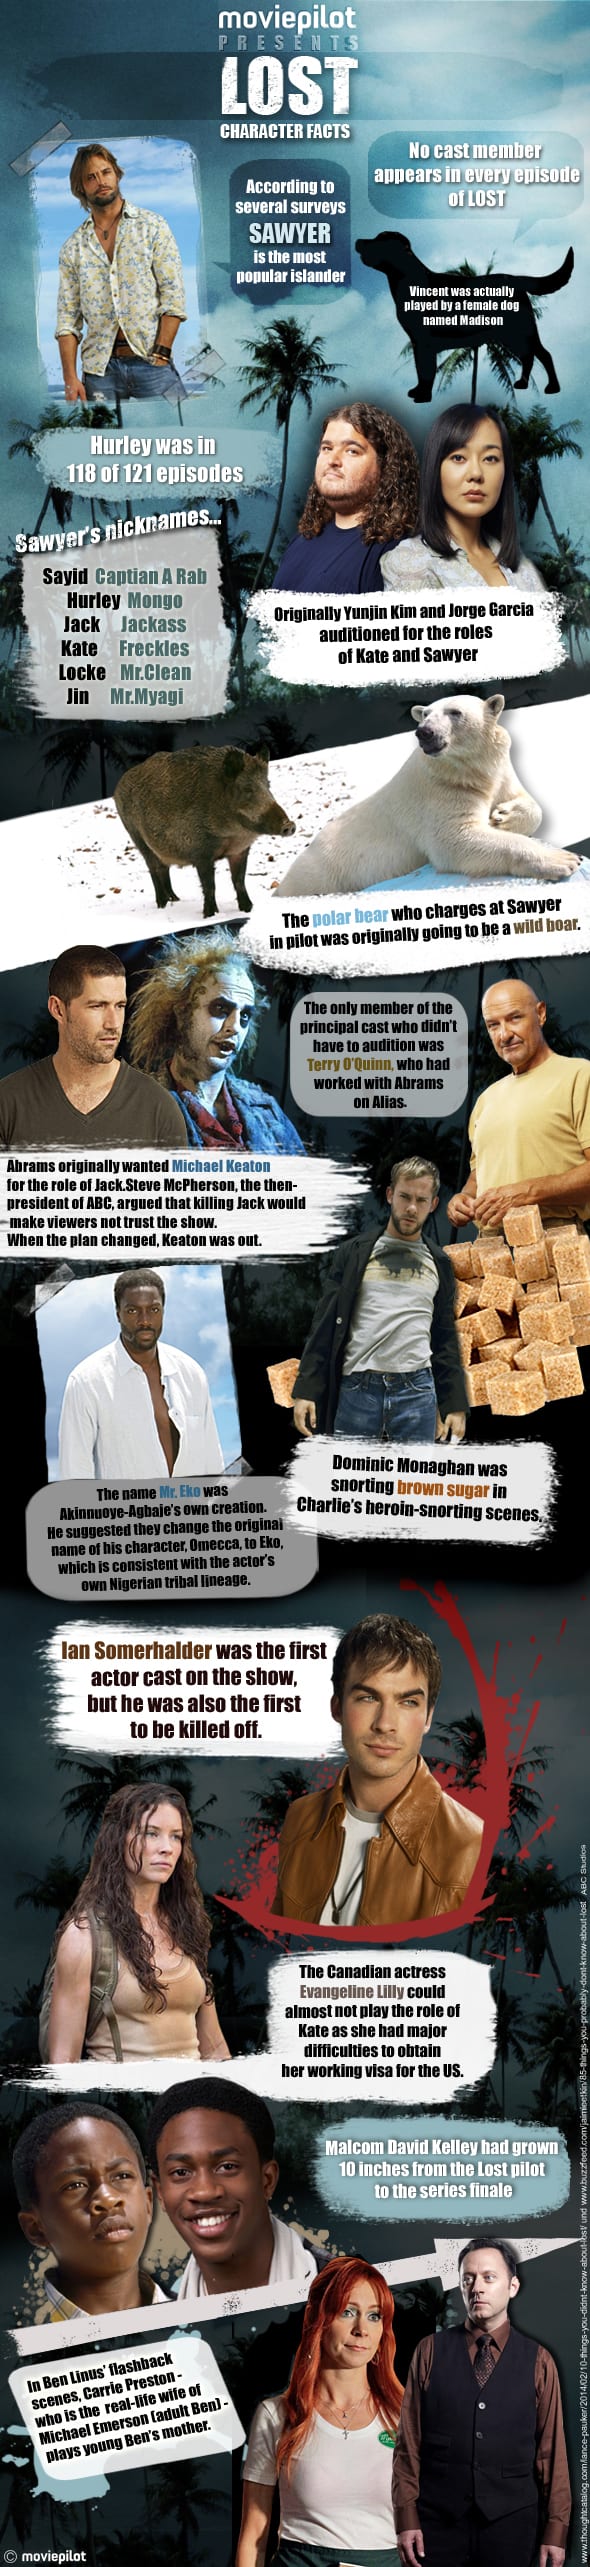 Lost-Characterfacts-English